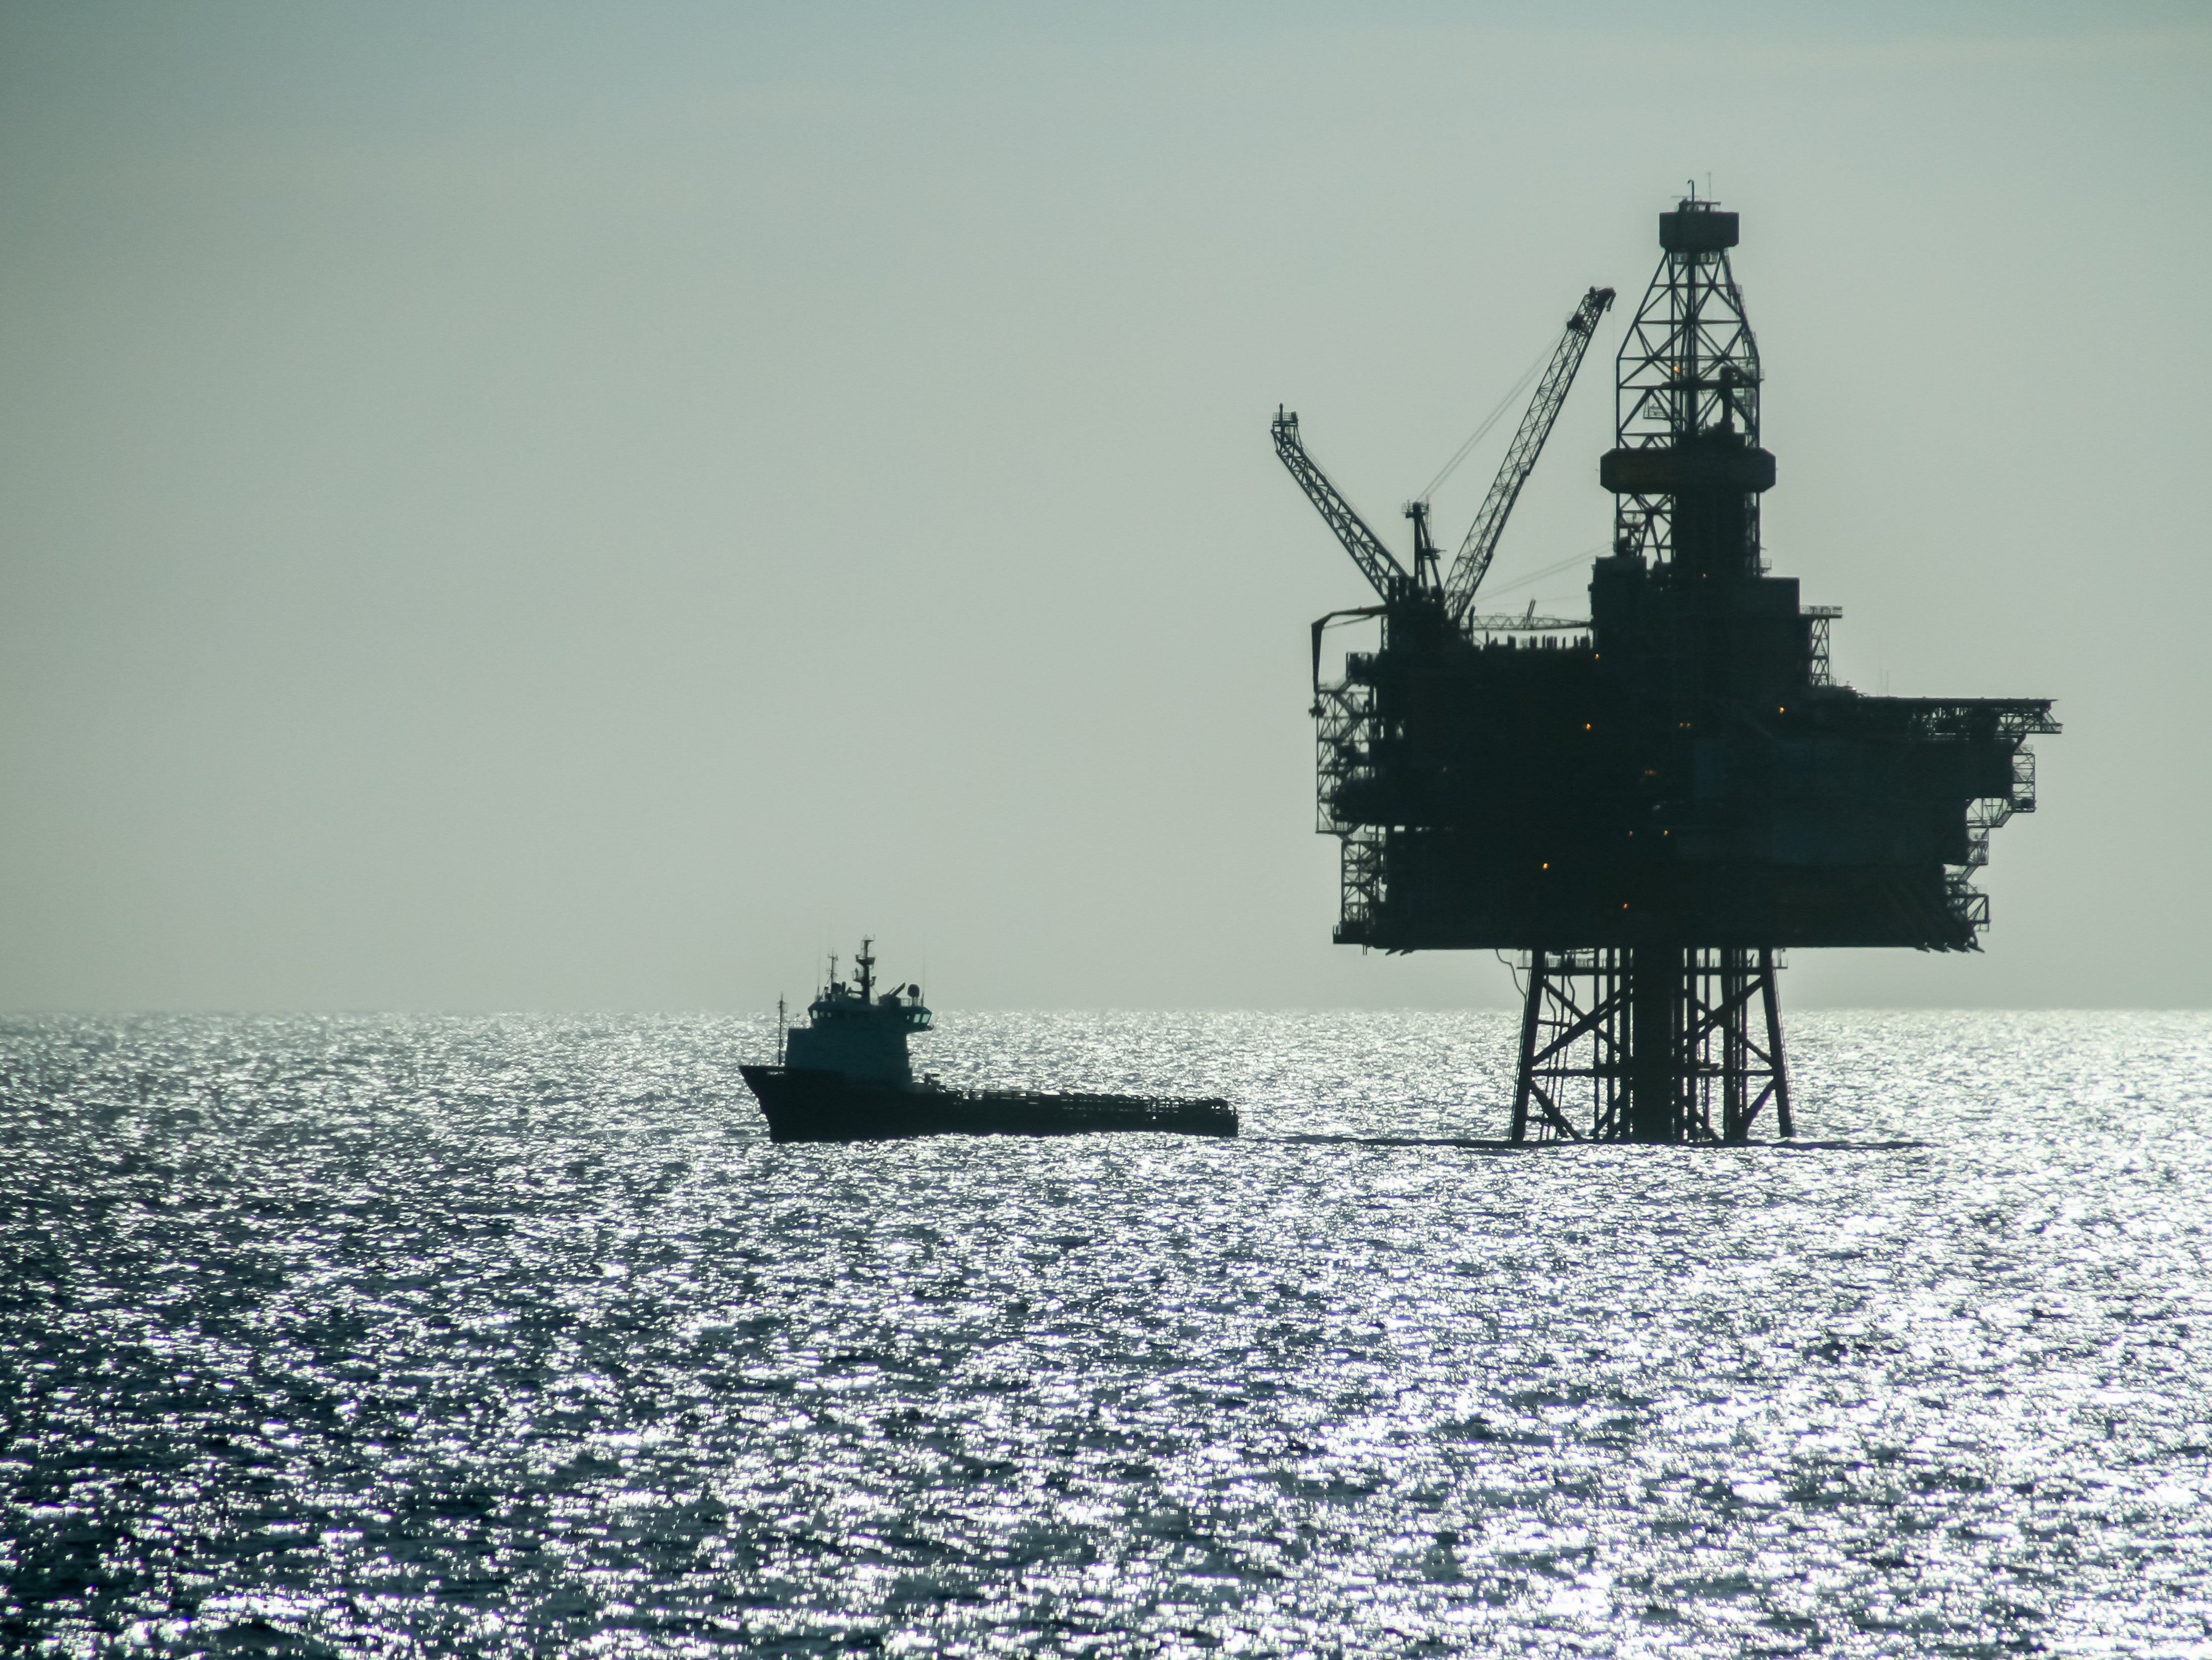 OIl and gas extraction in North Sea ‘no longer economic’, think-tank says